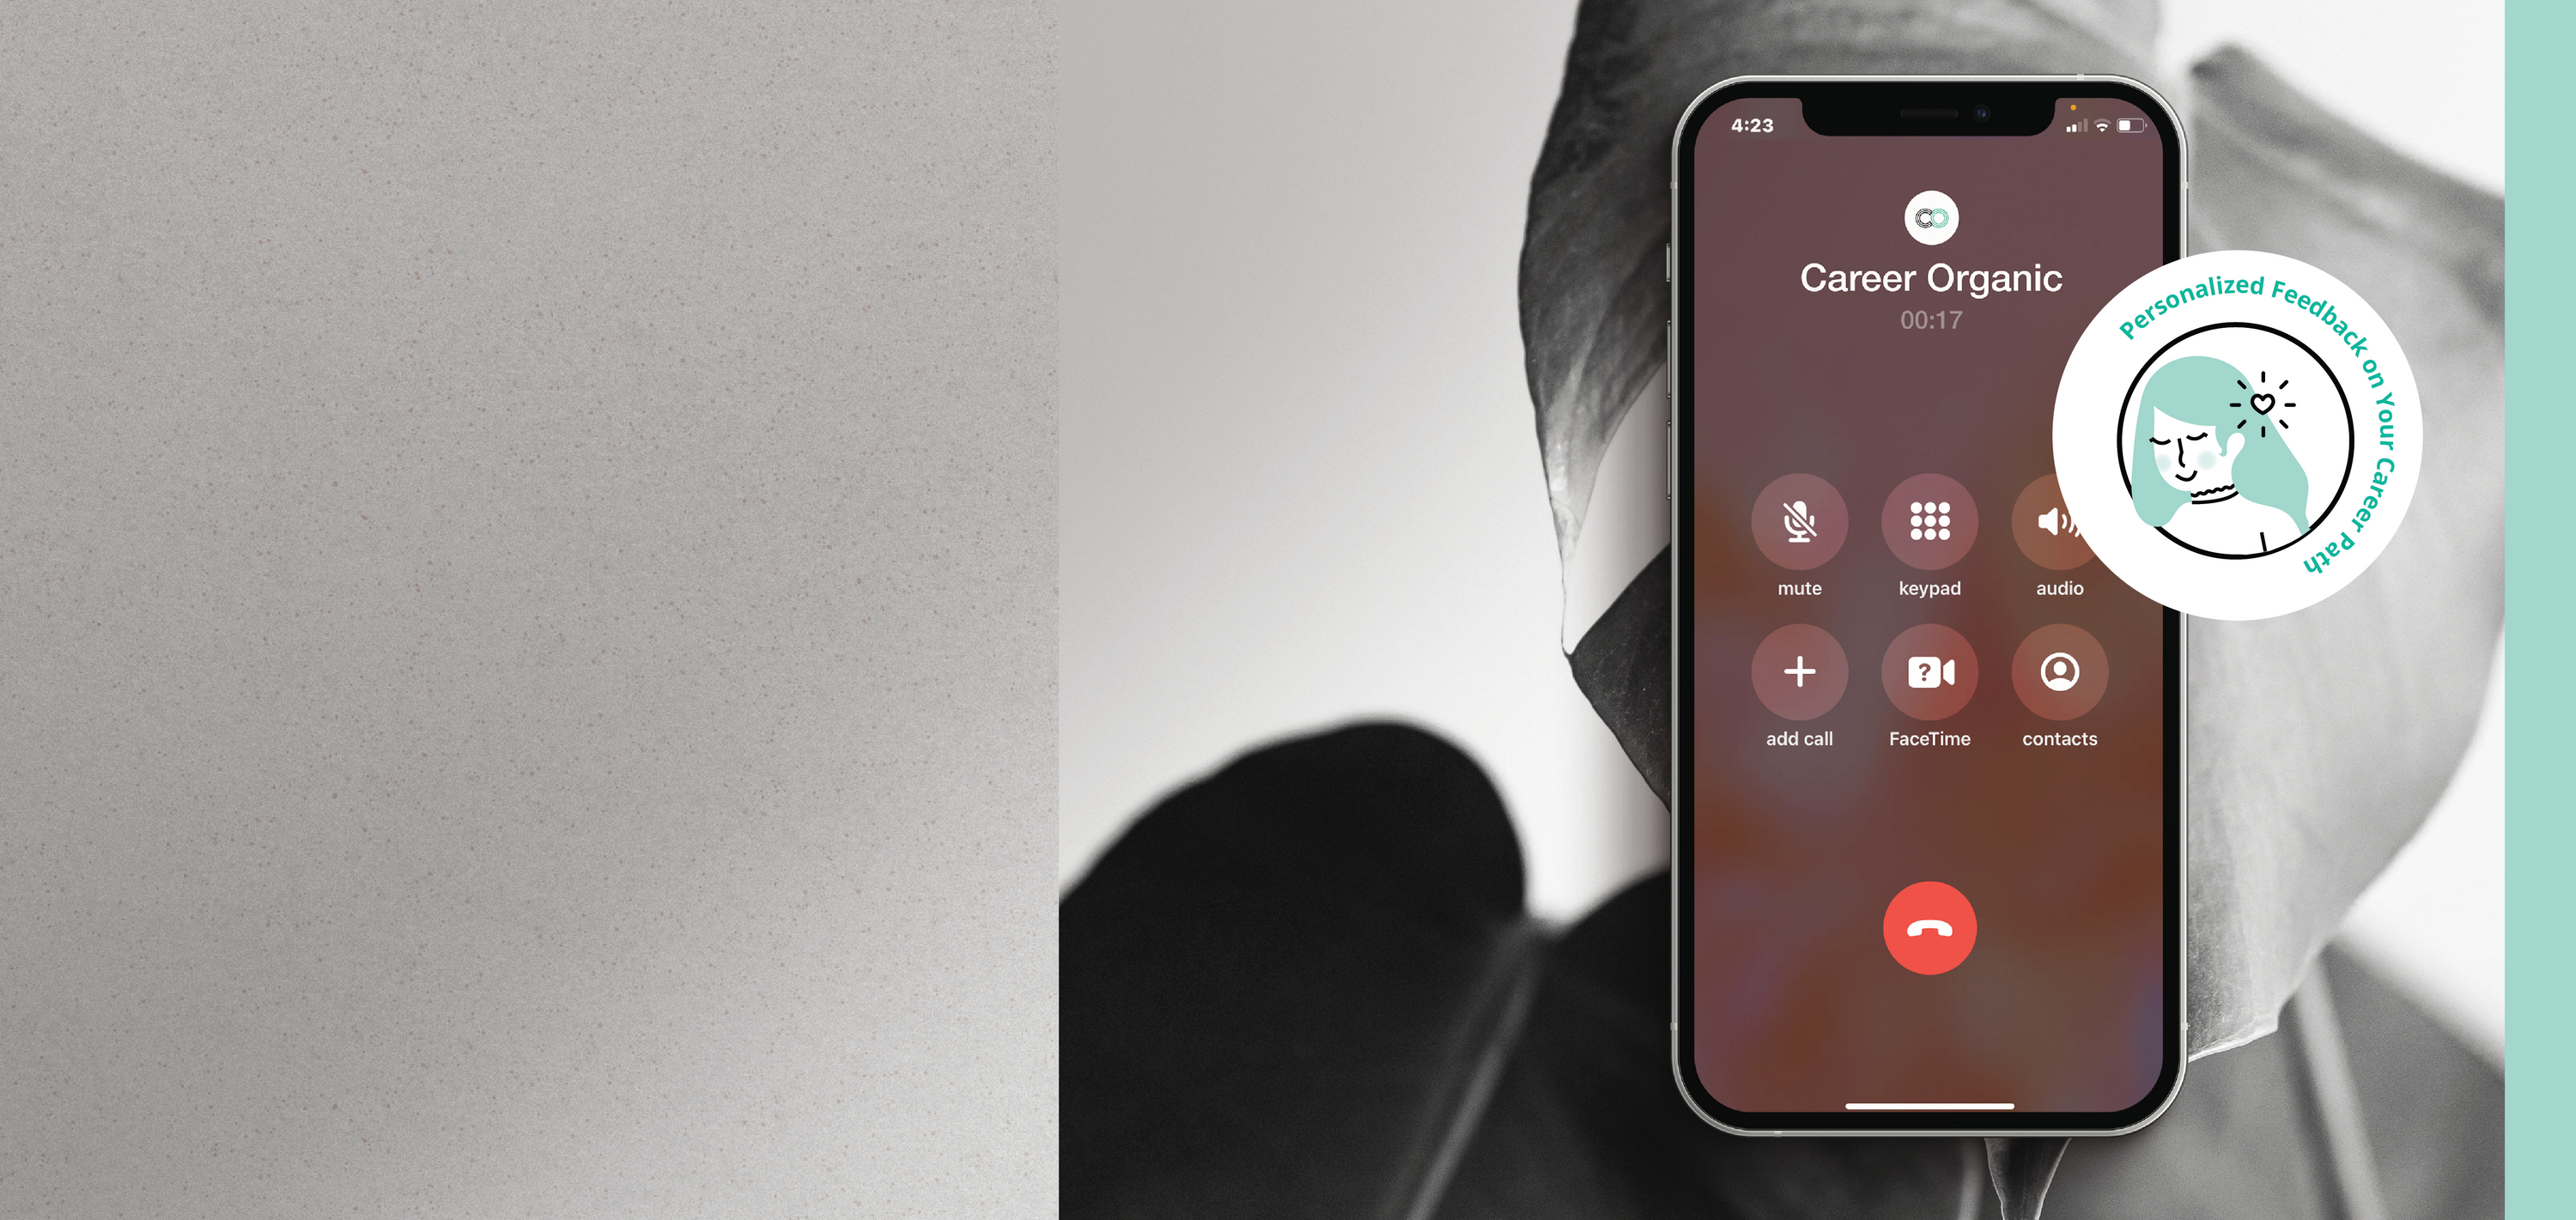 iphone with Career Organic Incoming Call displayed + simple icon of career coach with heart